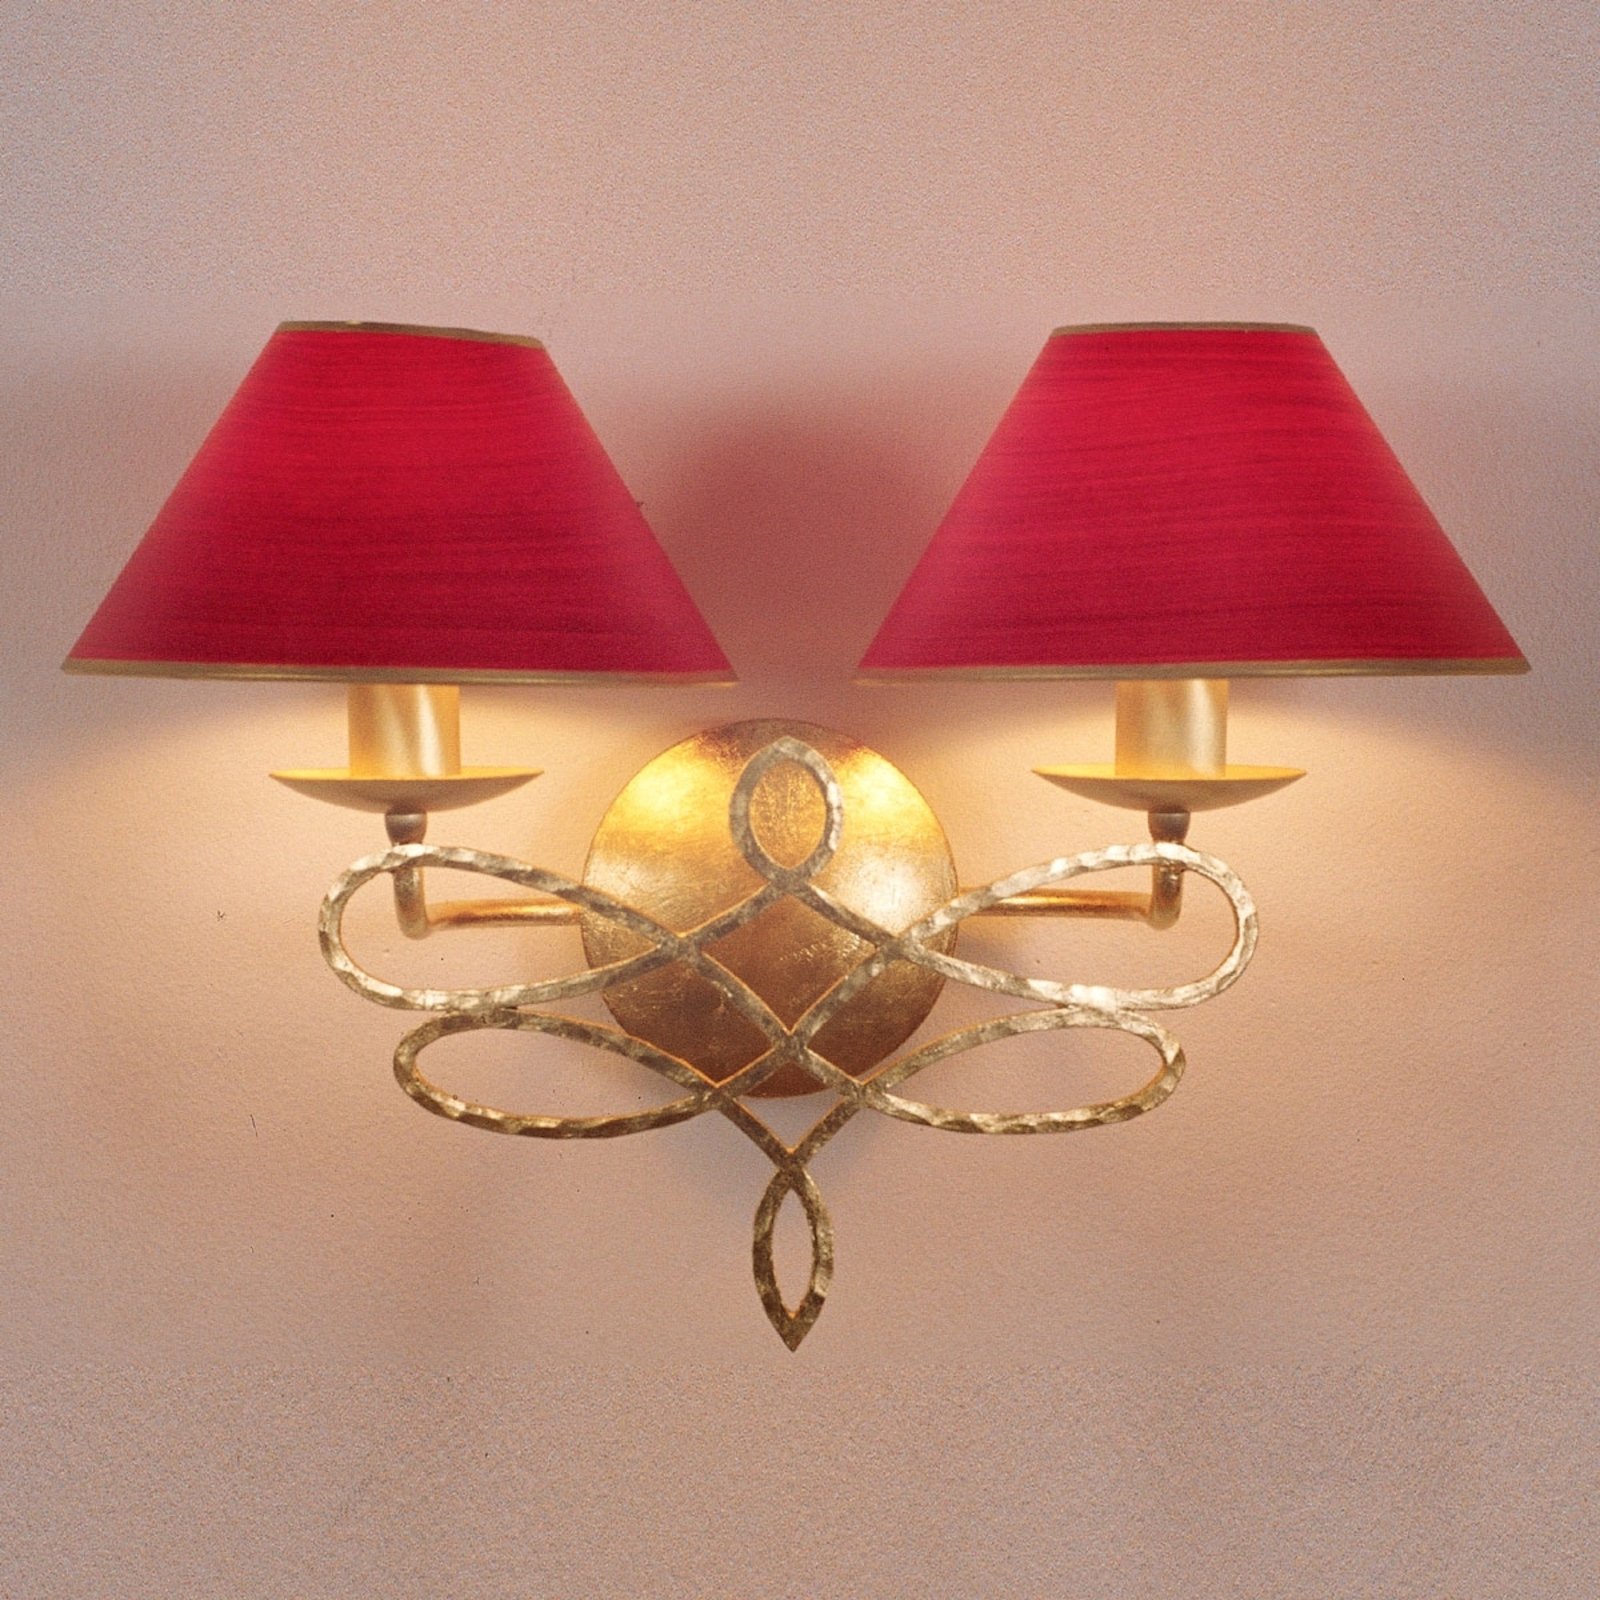 Menzel Sorent -  wall lamp with red shades, 2-bulb